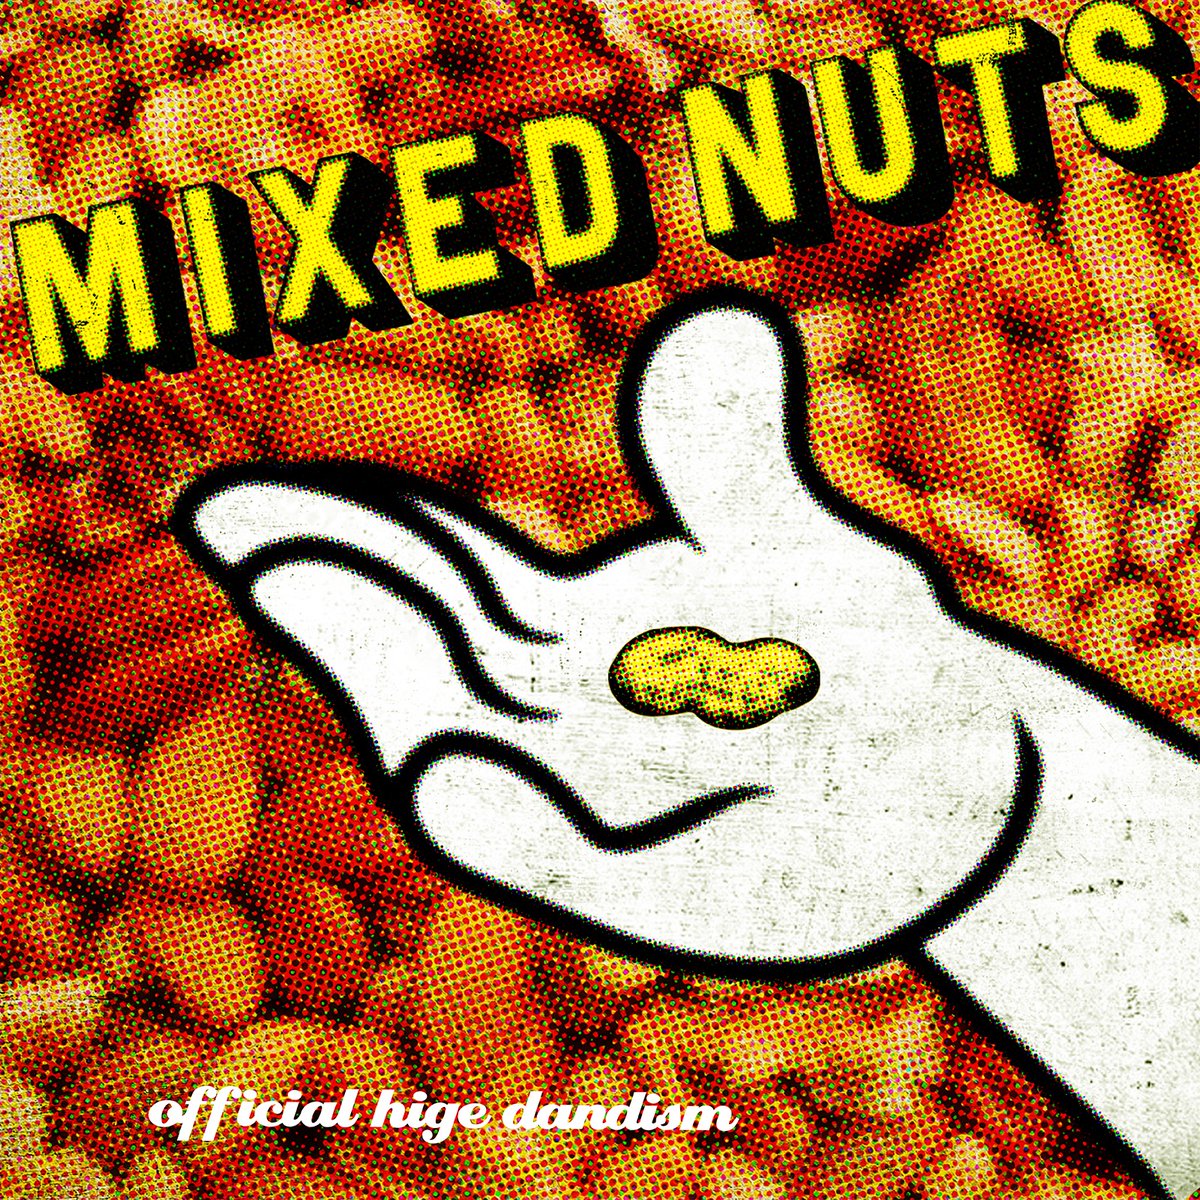 Official HIGE DANdism - Mix Nuts